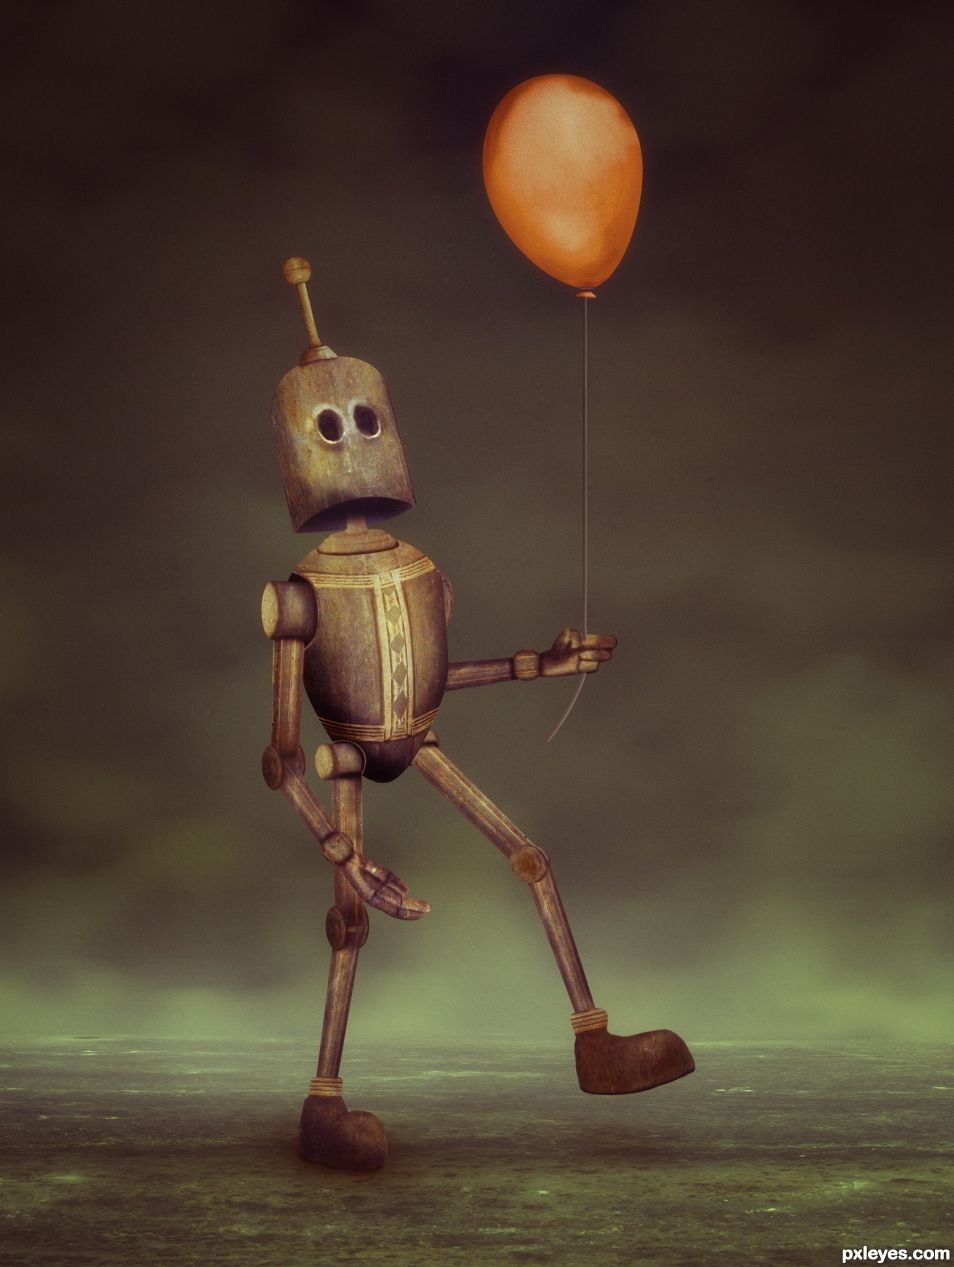 Creation of Robot and His Balloon: Step 20